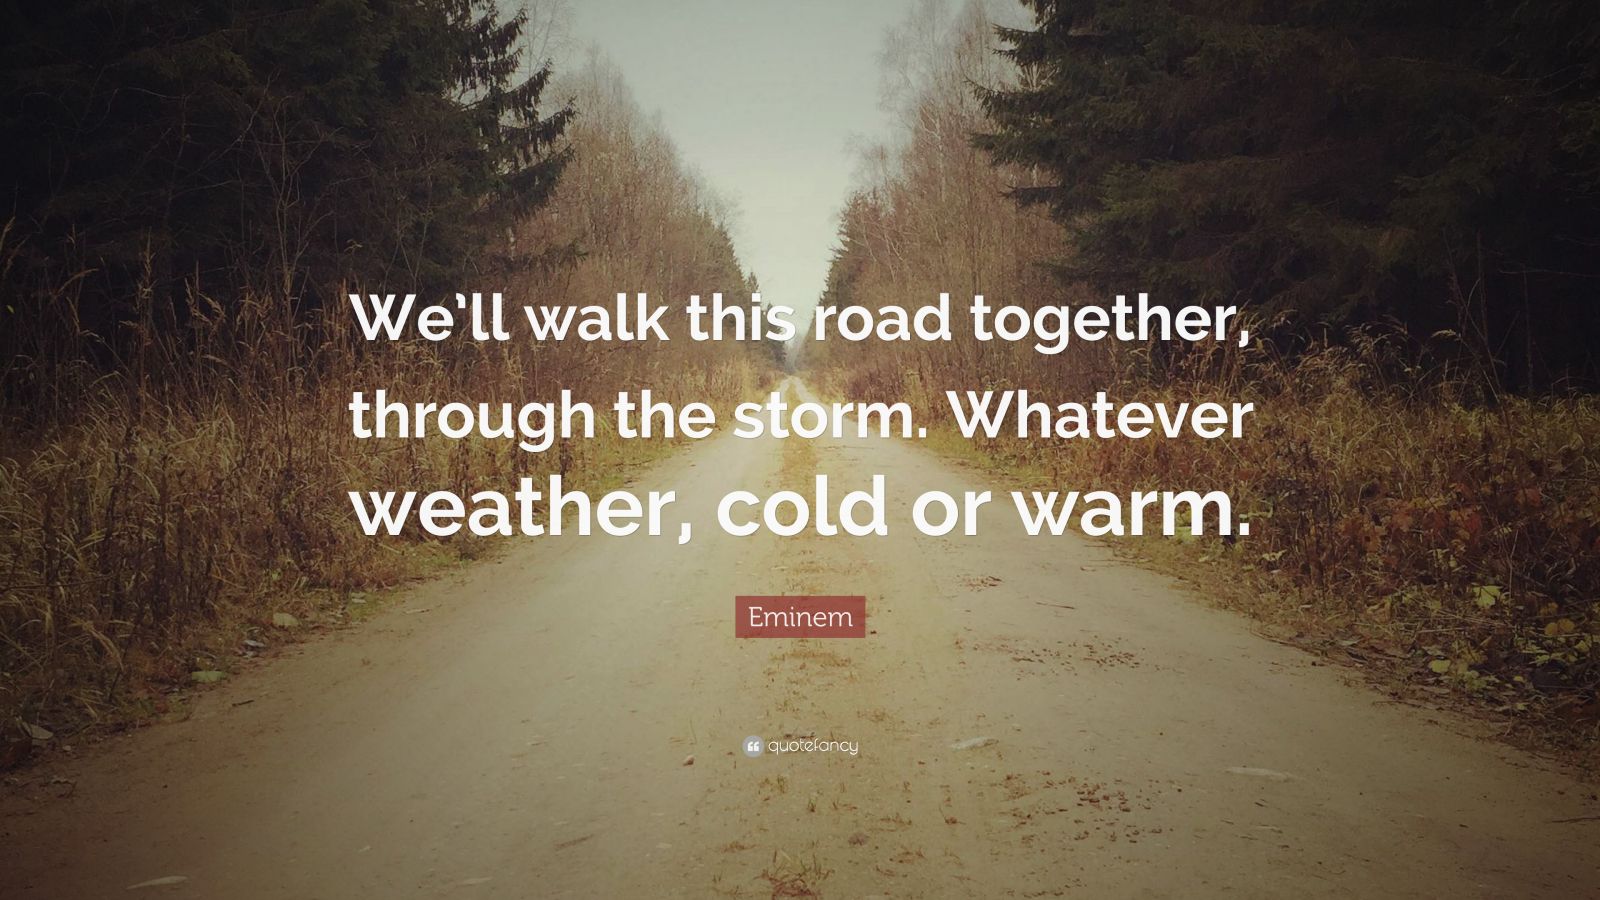 Eminem Quote: “We’ll walk this road together, through the storm